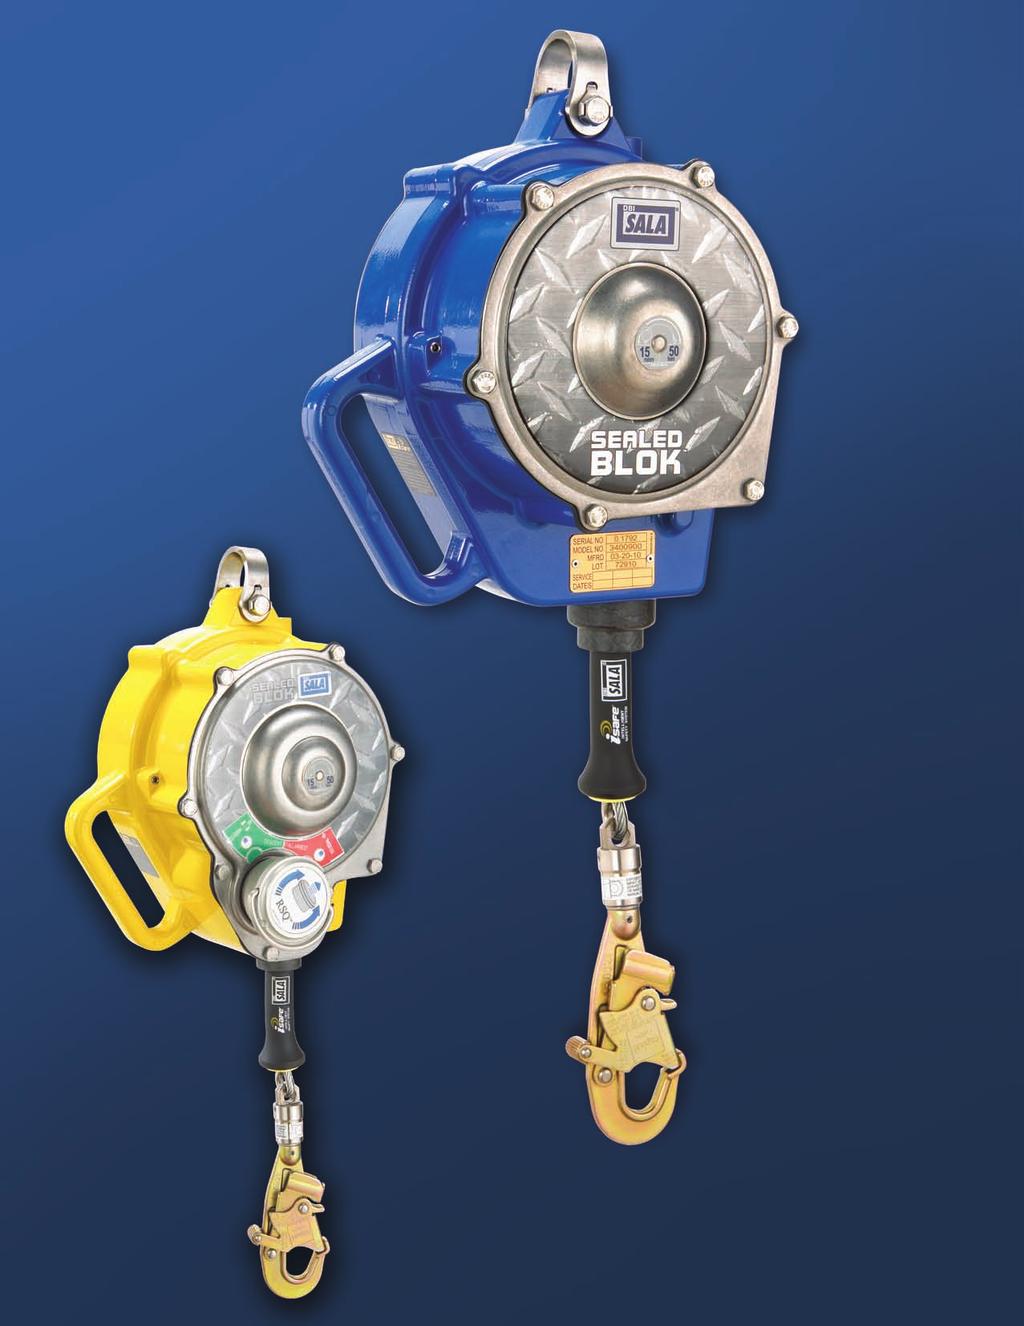 1 SEALED DESIGN Ensures efficient, safe operation under all working conditions the only SRL to meet IP68 sealed rating ANTI-RATCHETING DESIGN Stays locked on rigid and non-rigid (horizontal lifeline)